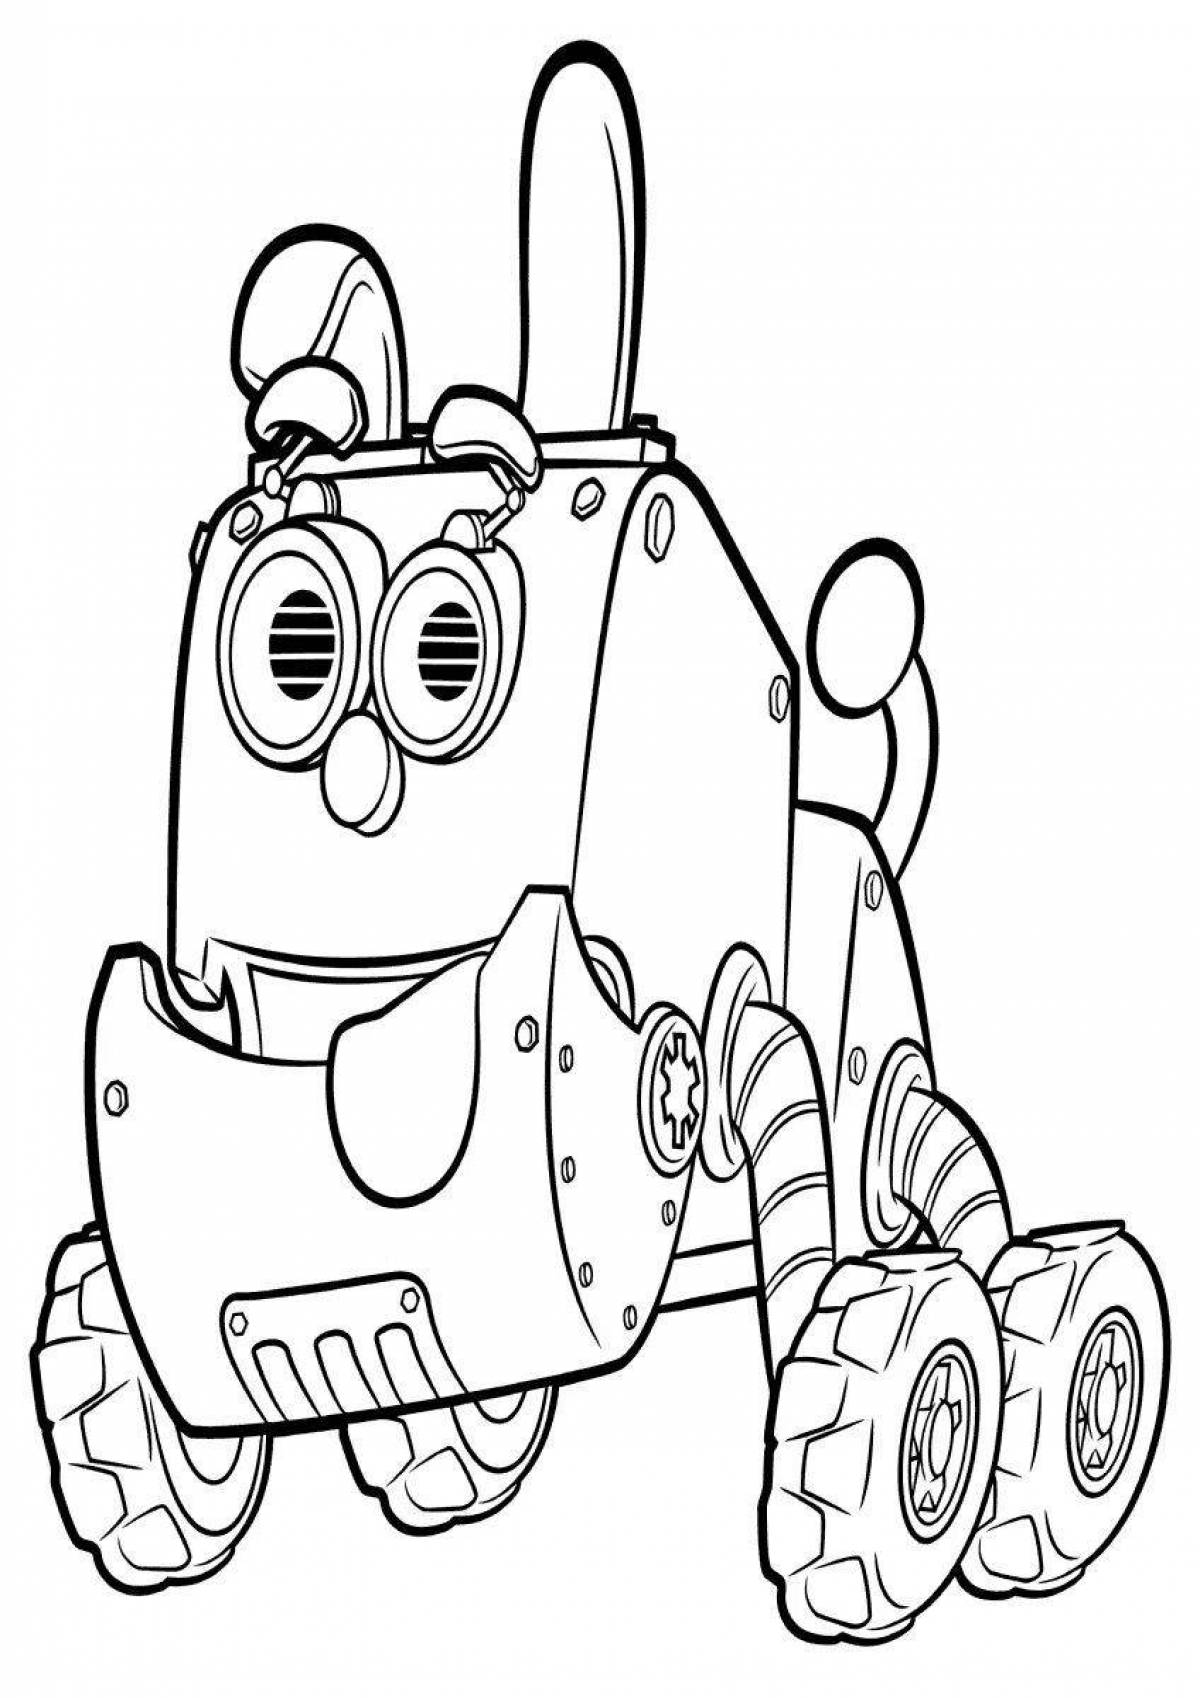 Coloring page cute robot dog